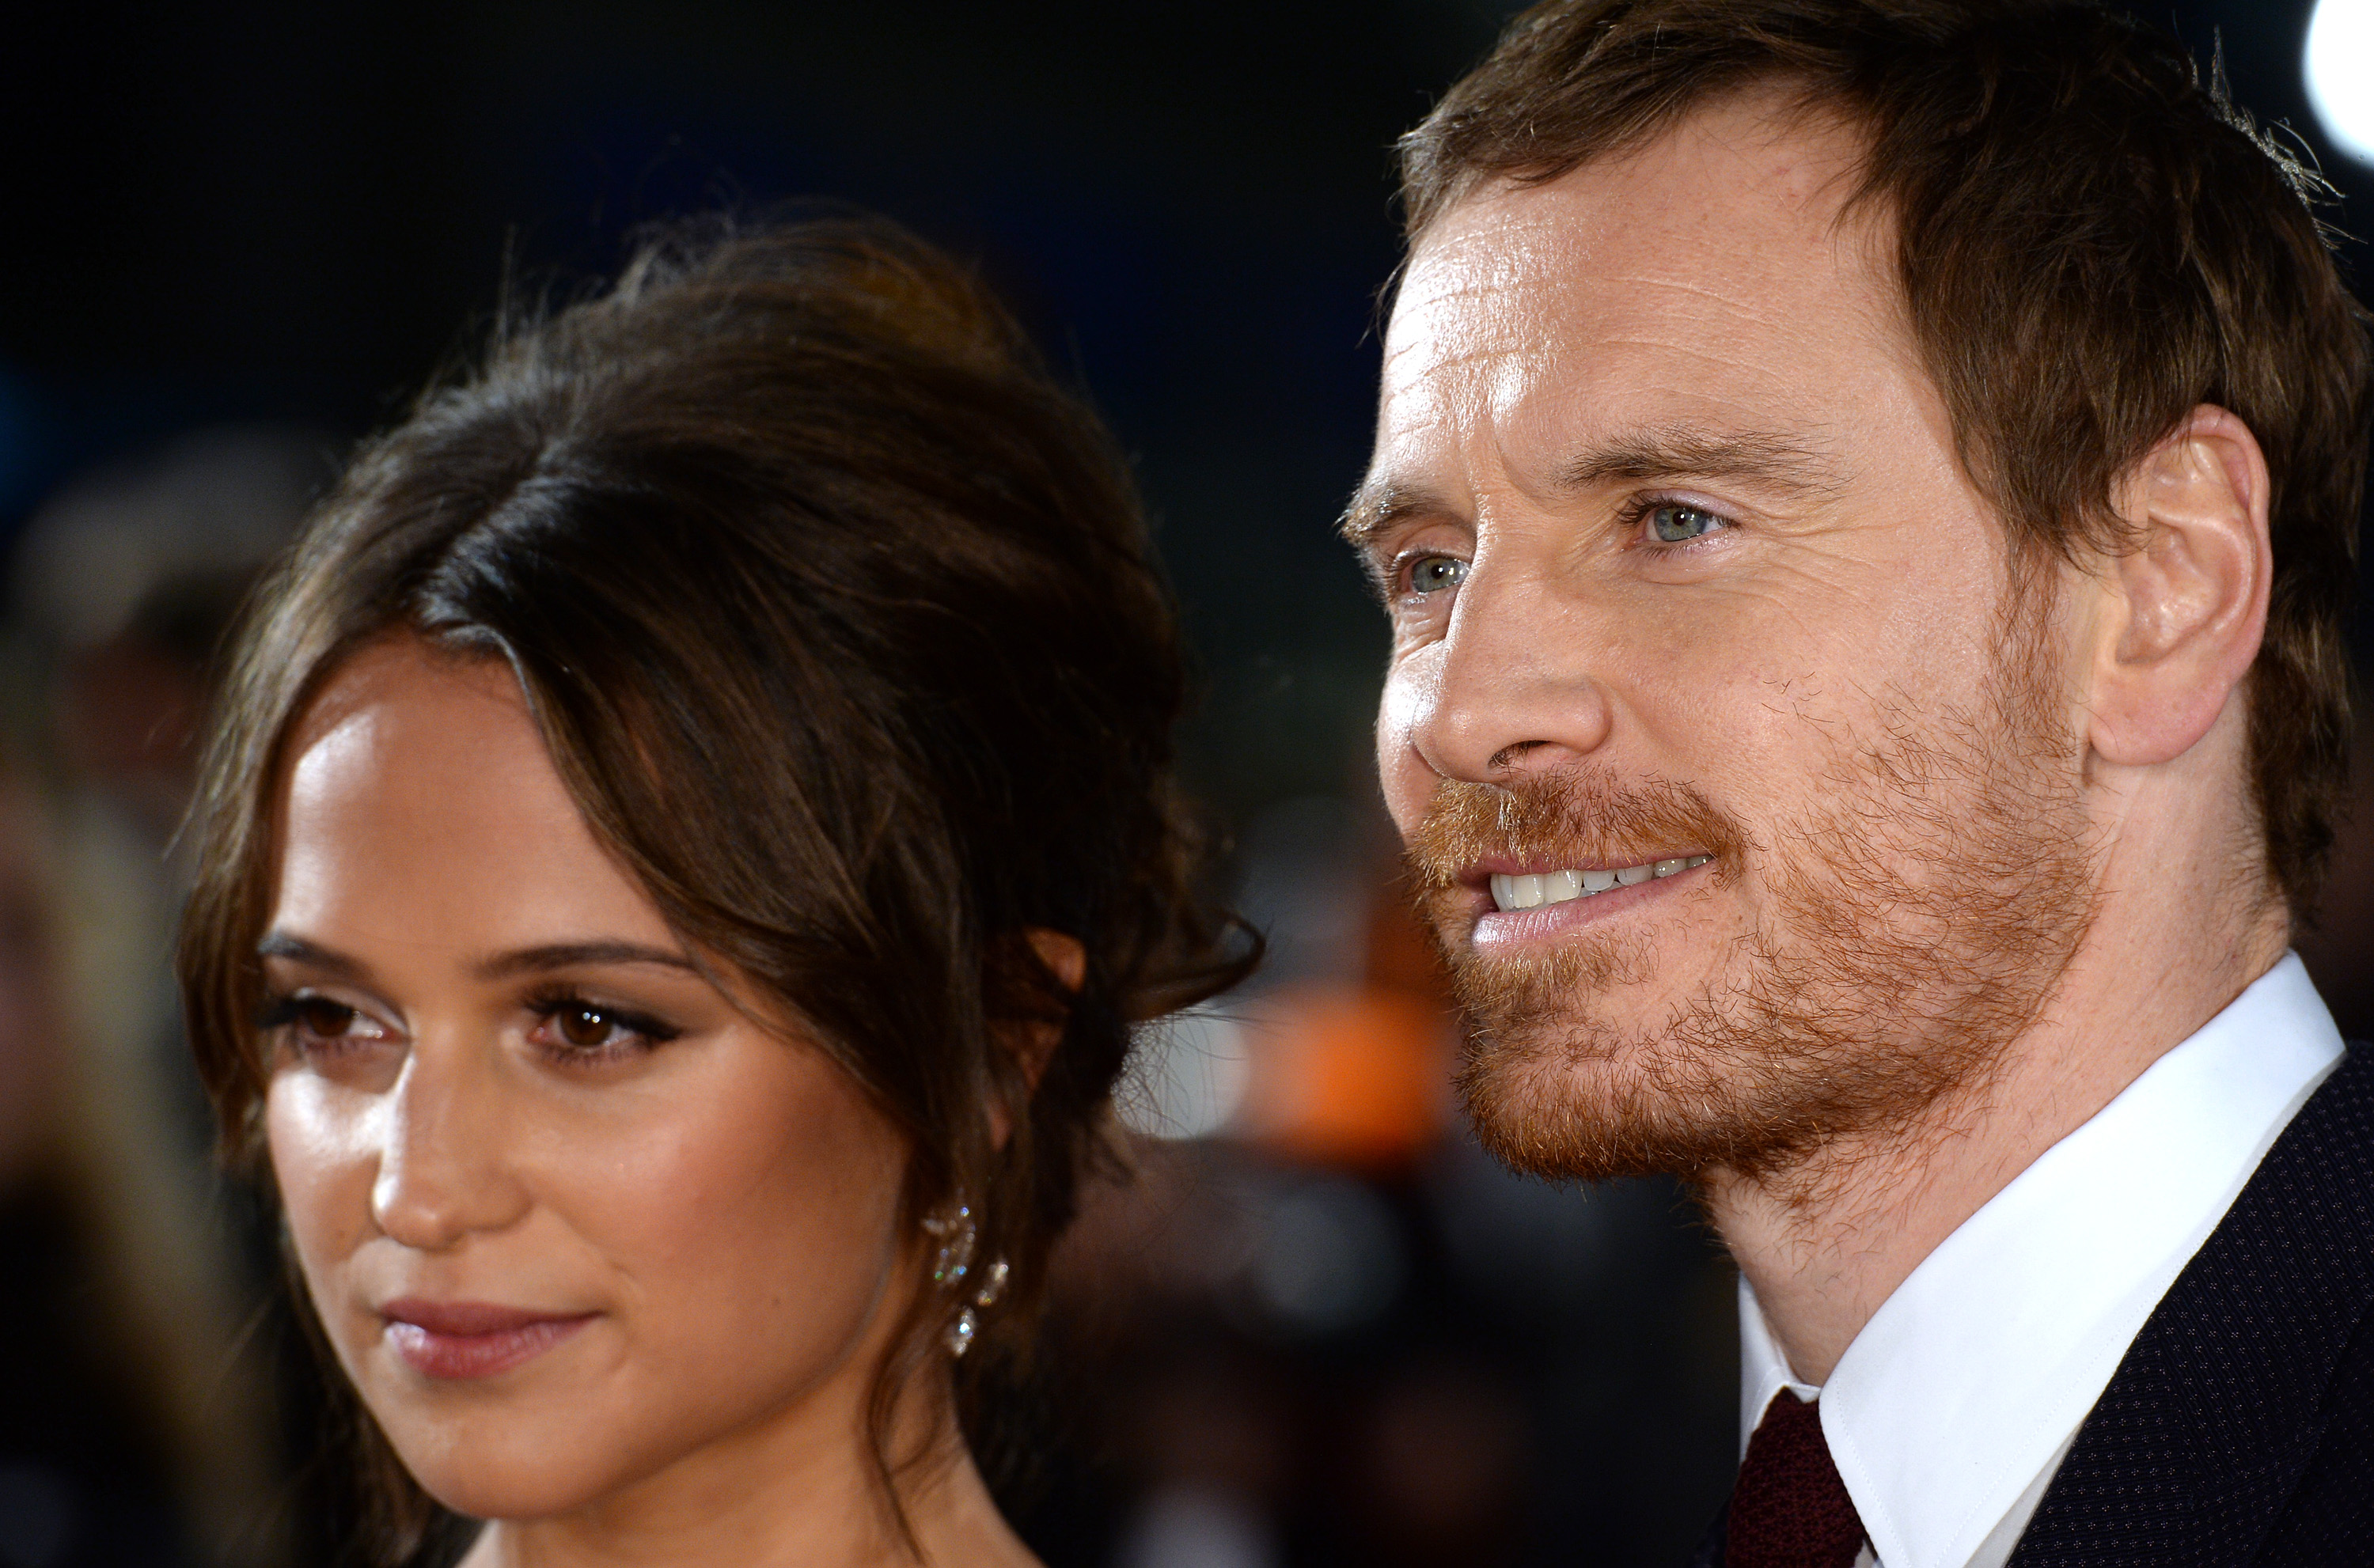 Michael Fassbender and Alicia Vikander arrive for the UK premiere of "The Light Between Oceans" at The Curzon Mayfair on October 19, 2016 in London, England. (Anthony Harvey&mdash;Getty Images)